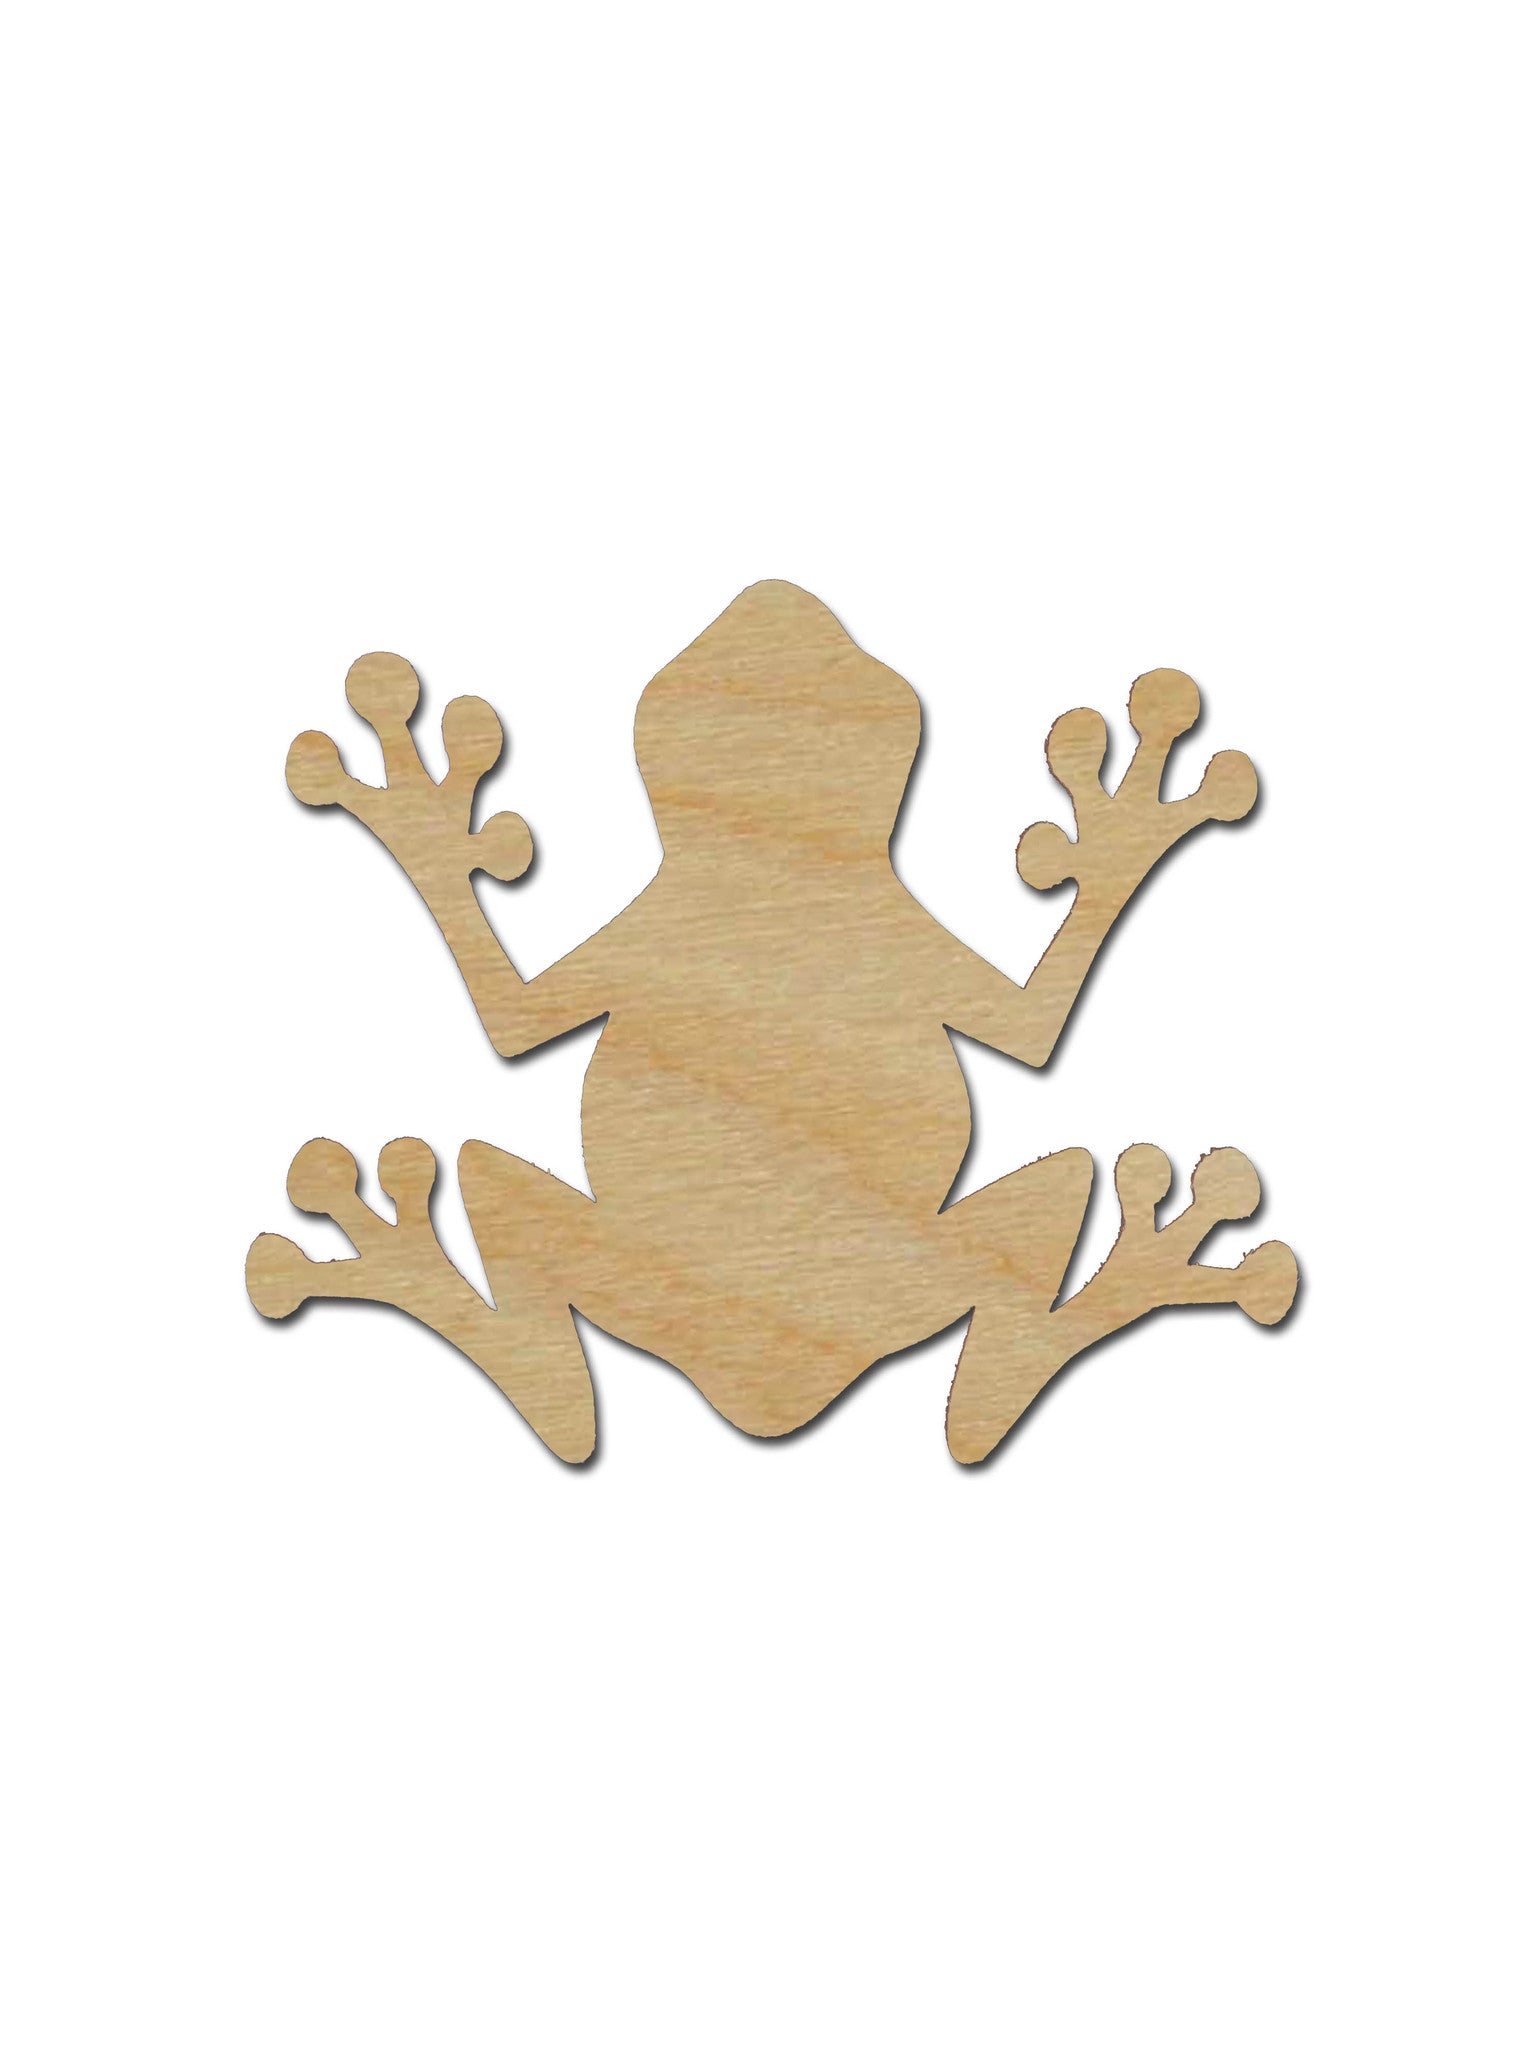 frog shapes to cut out